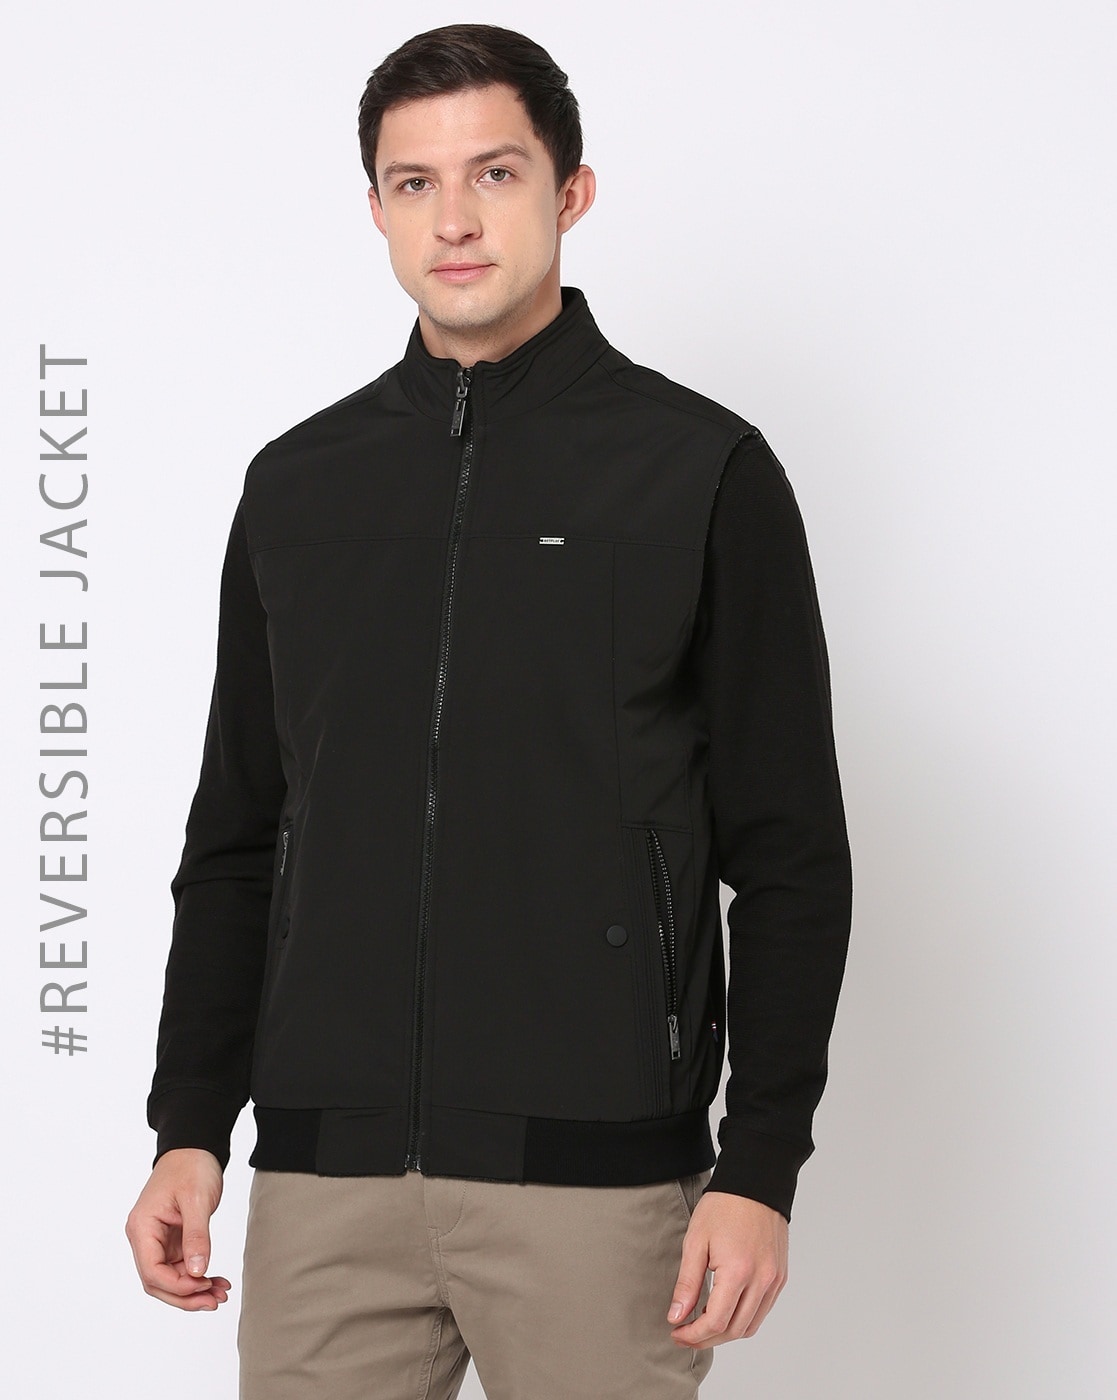 NETPLAY Checked Tailor Fit Bomber Jacket With Zipper Pockets|BDF Shopping